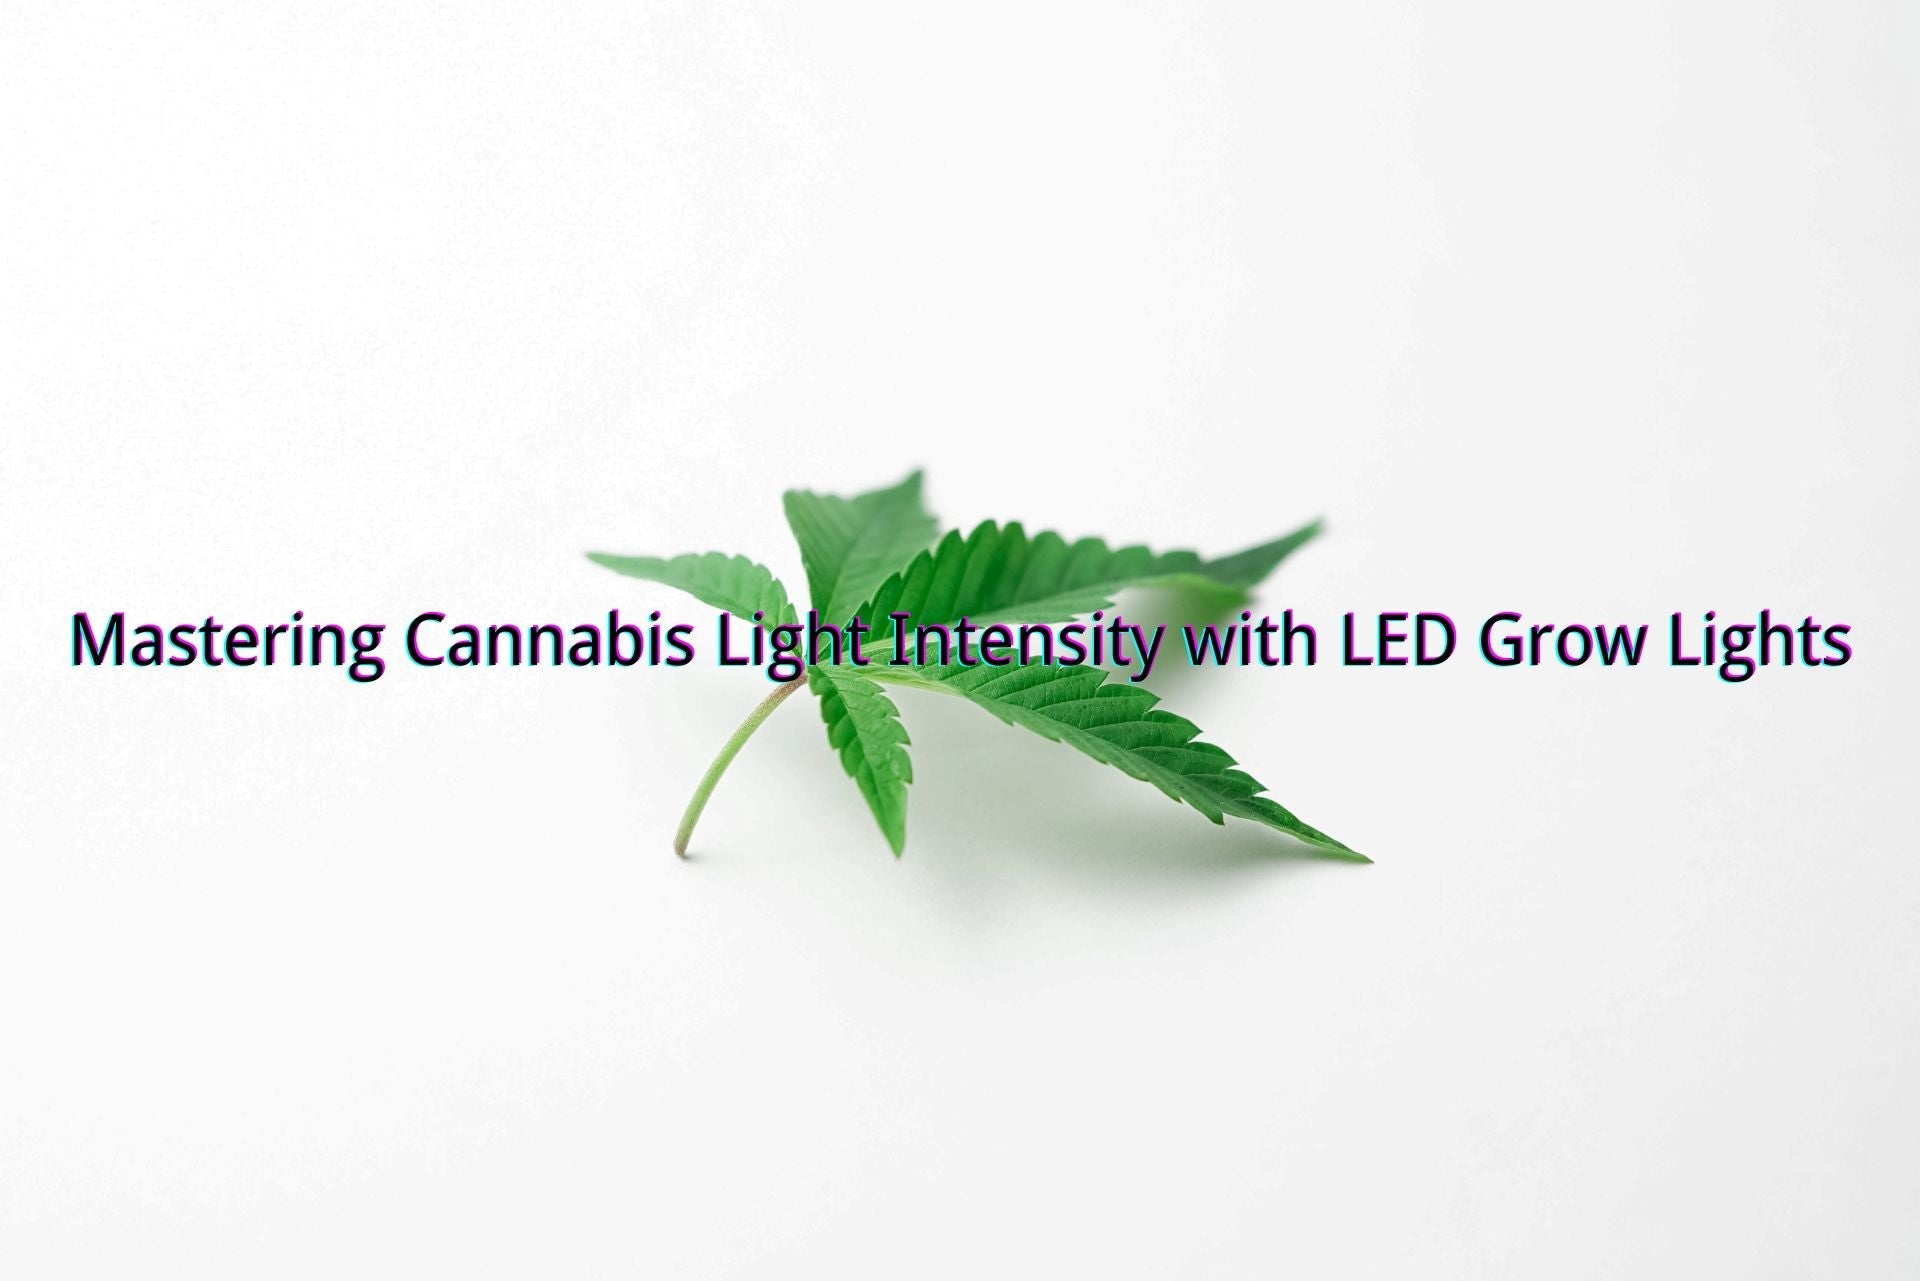 Mastering Cannabis Light Intensity with LED Grow Lights